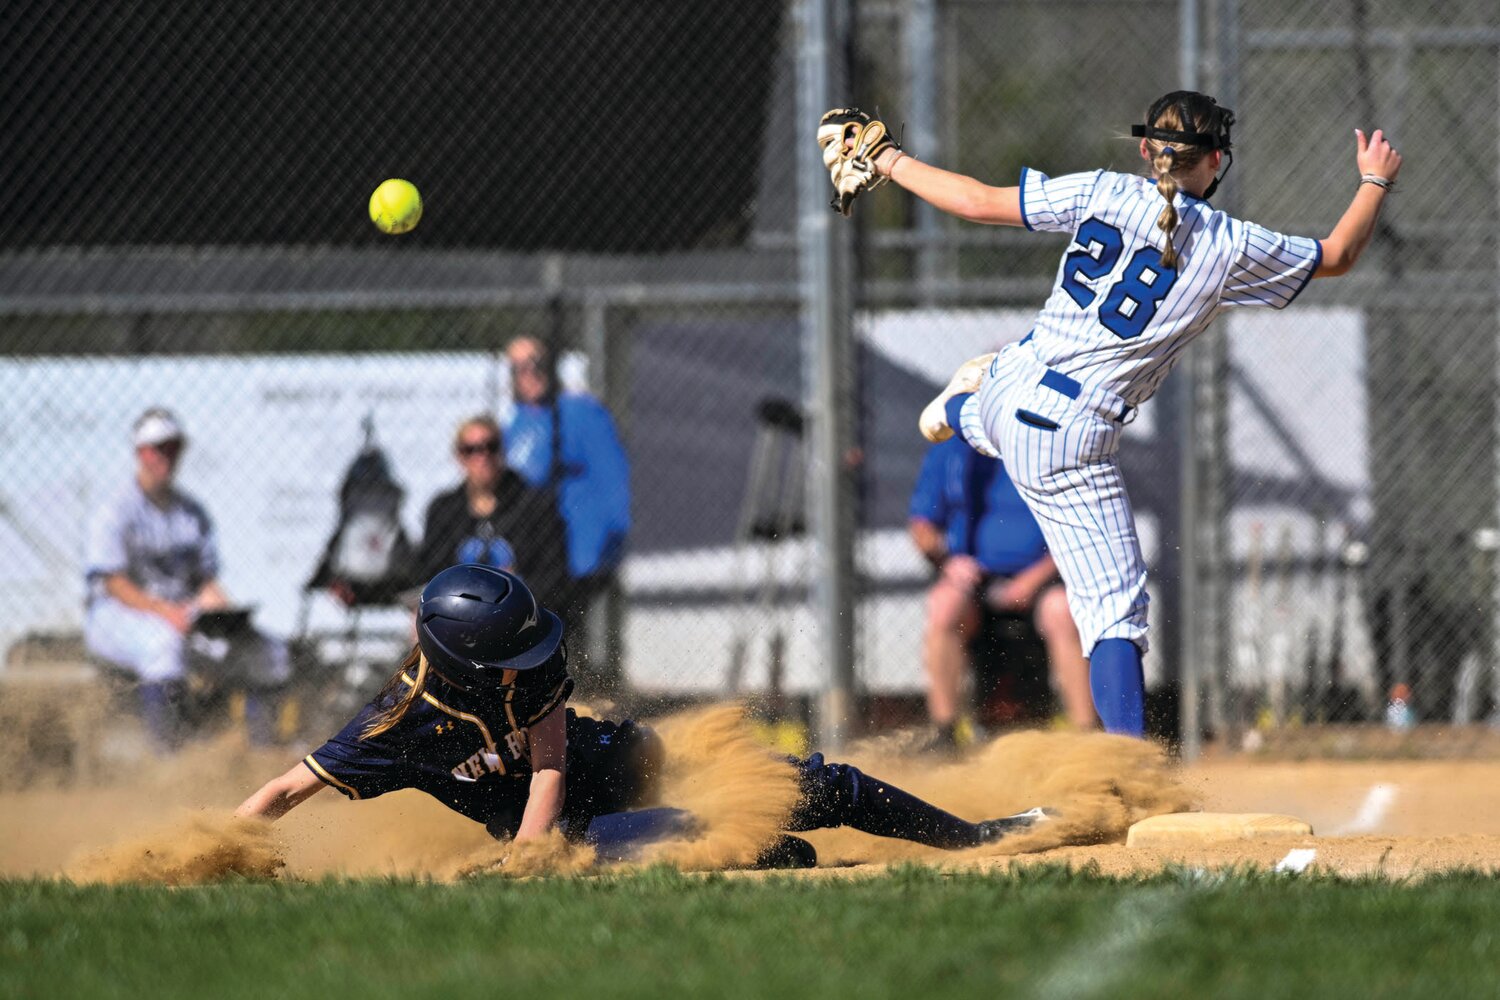 Stealing third base in the third inning, New Hope-Solebury’s Kaylee Harris slides ahead of the throw to Quakertown’s Elisabeth Stout.